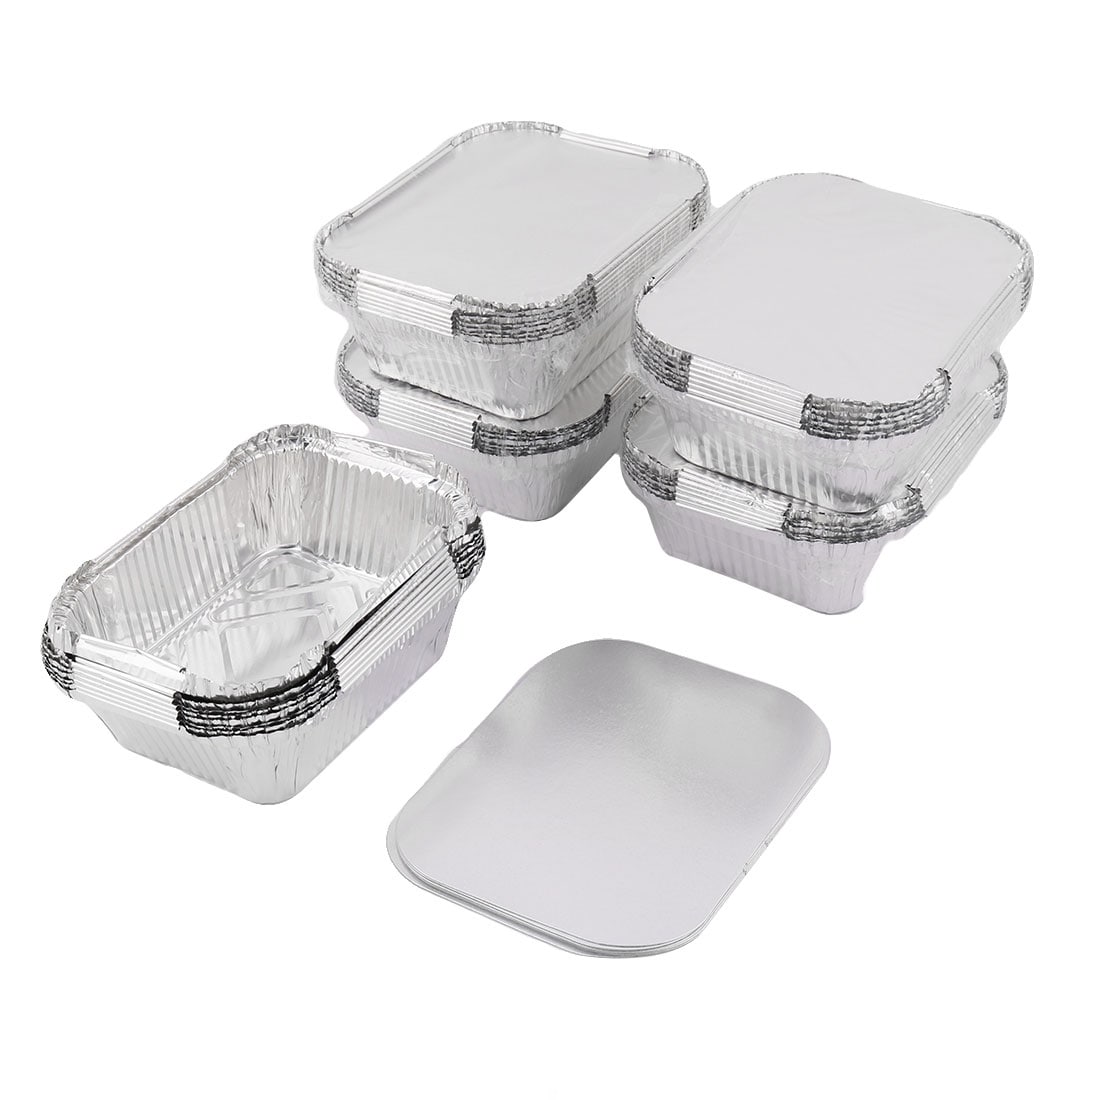 https://ak1.ostkcdn.com/images/products/is/images/direct/fb72d435187c91c530d85a327acfcbfd5b5d4bc3/Outdoor-Barbecue-Aluminum-Foil-Food-Storage-Container-Silver-Tone-440ml-40pcs.jpg